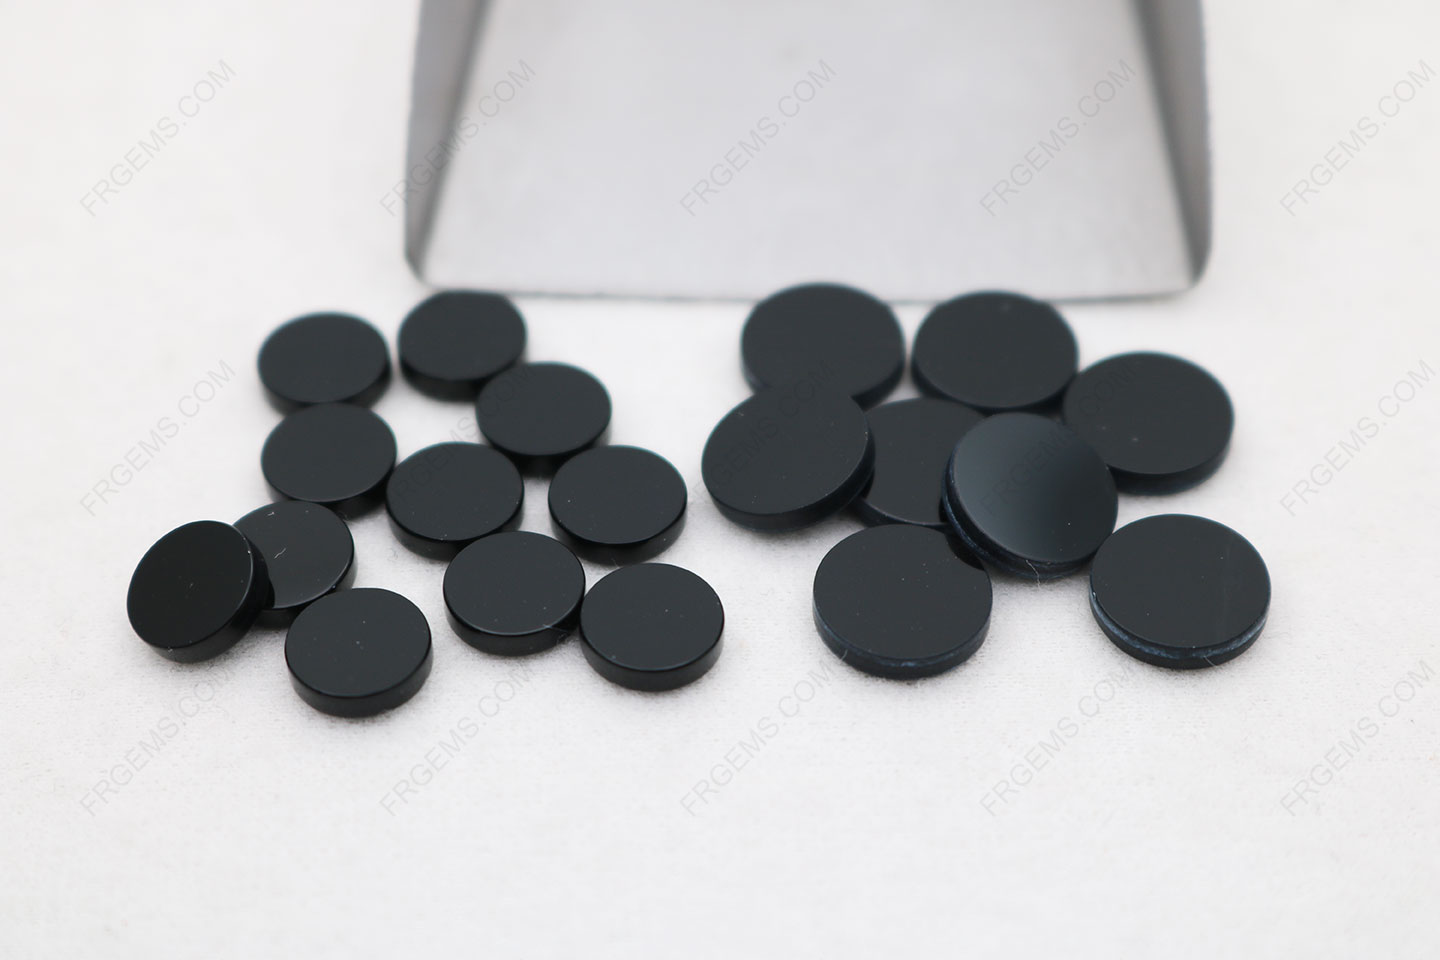 Natural Black Onyx Smooth Flat Disc Coin shape 10mm and 8mm gemstones wholesale from China Supplier